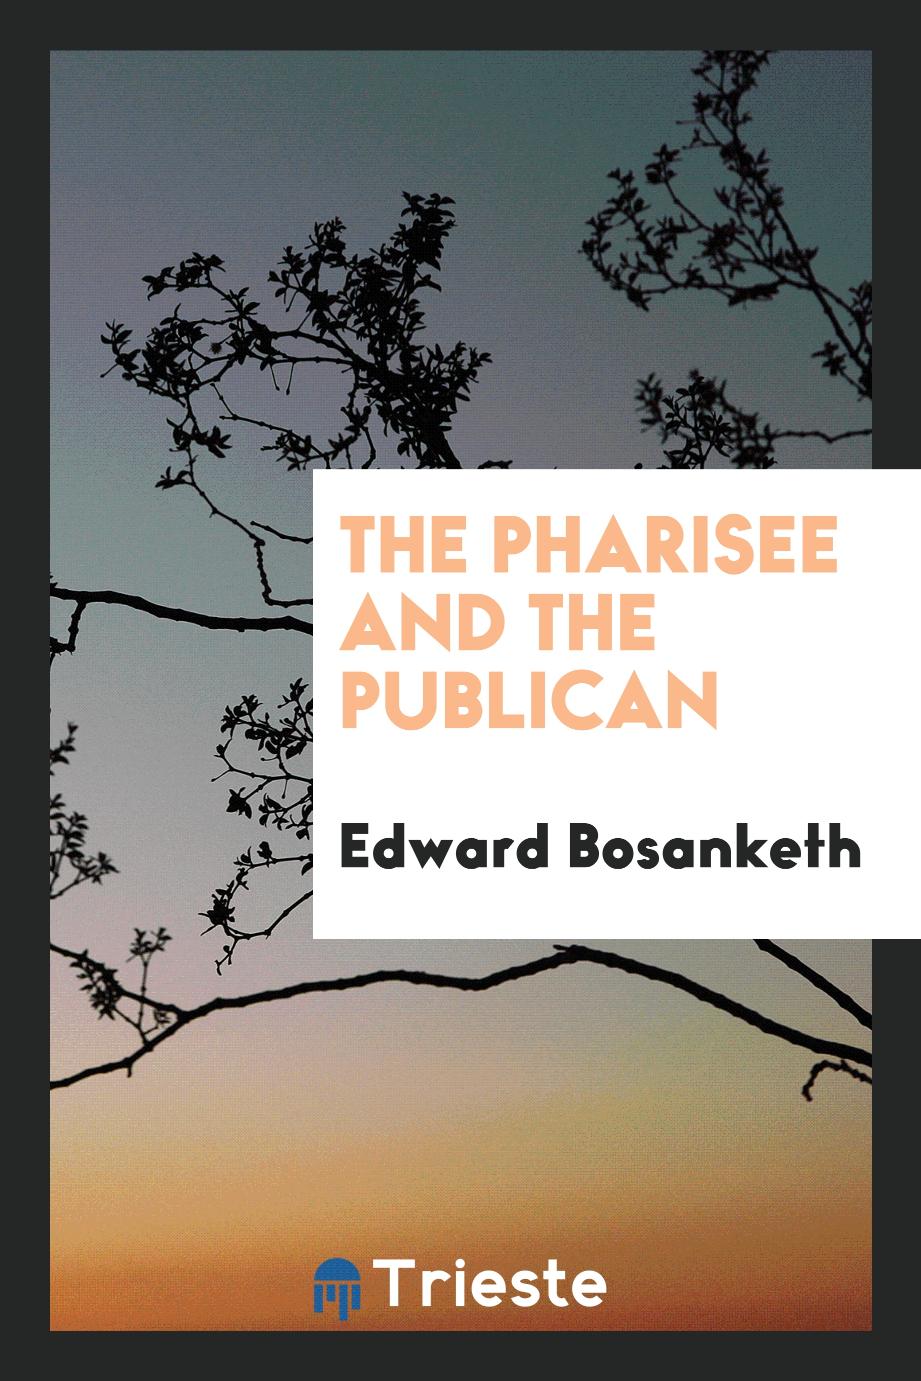 The Pharisee and the publican